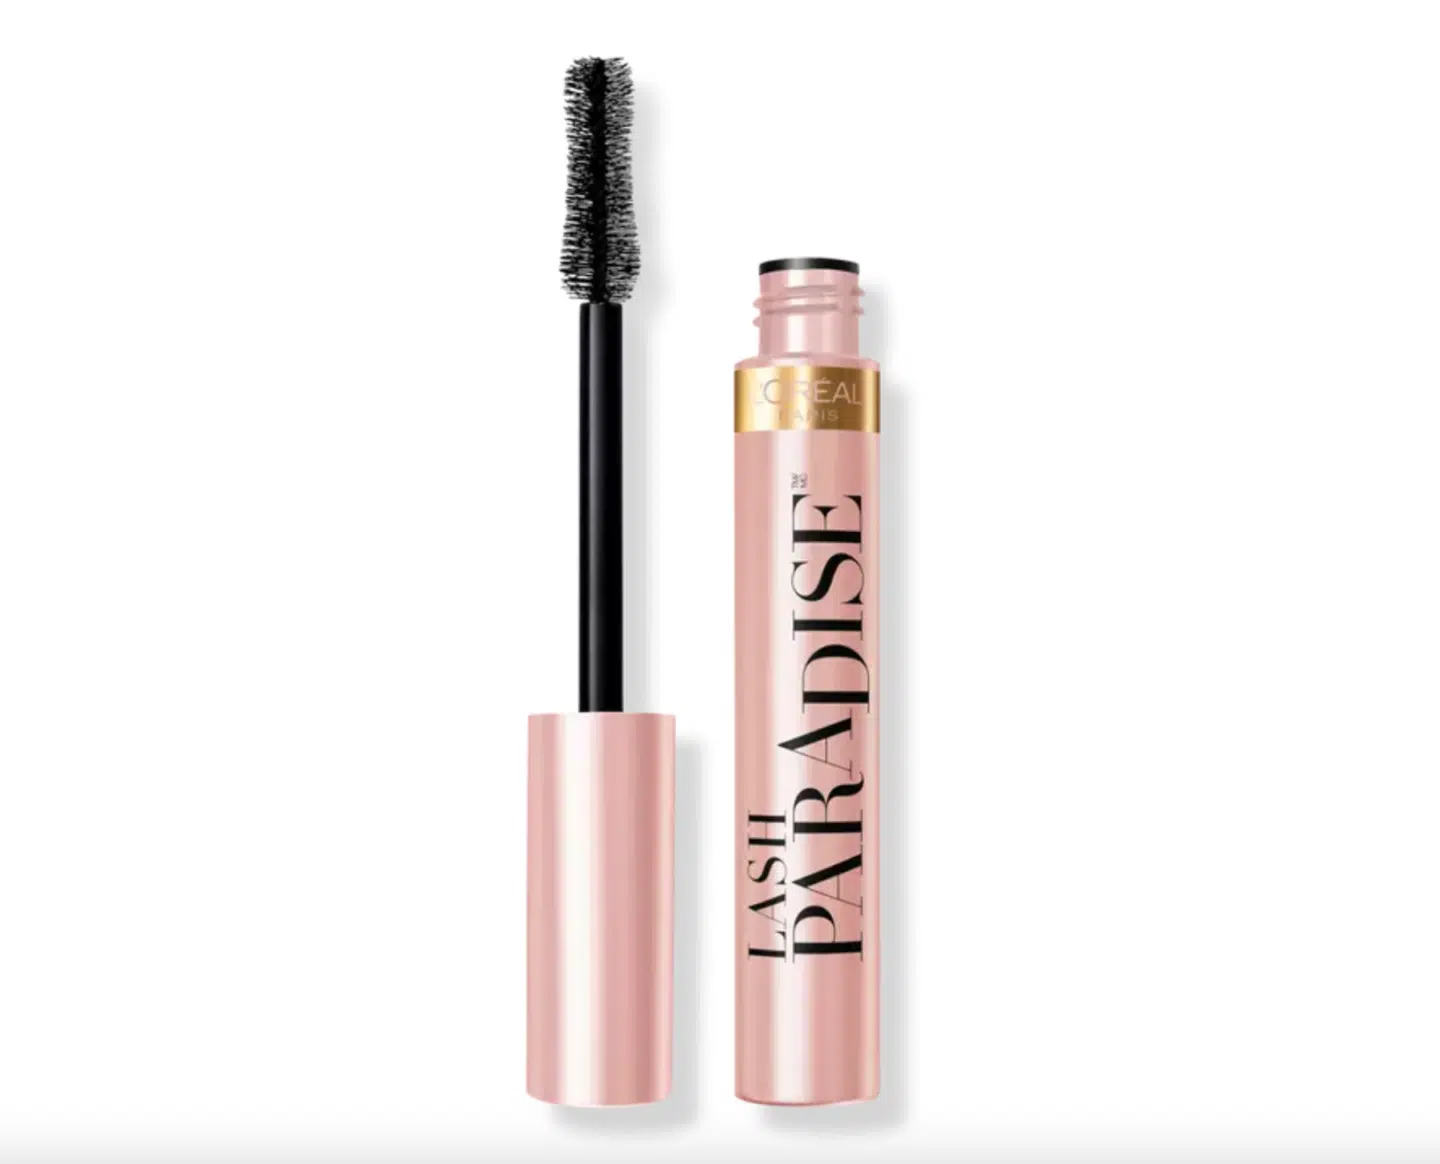 Top 6 Better Than Sex mascara dupes, by beauty blogger What The Fab